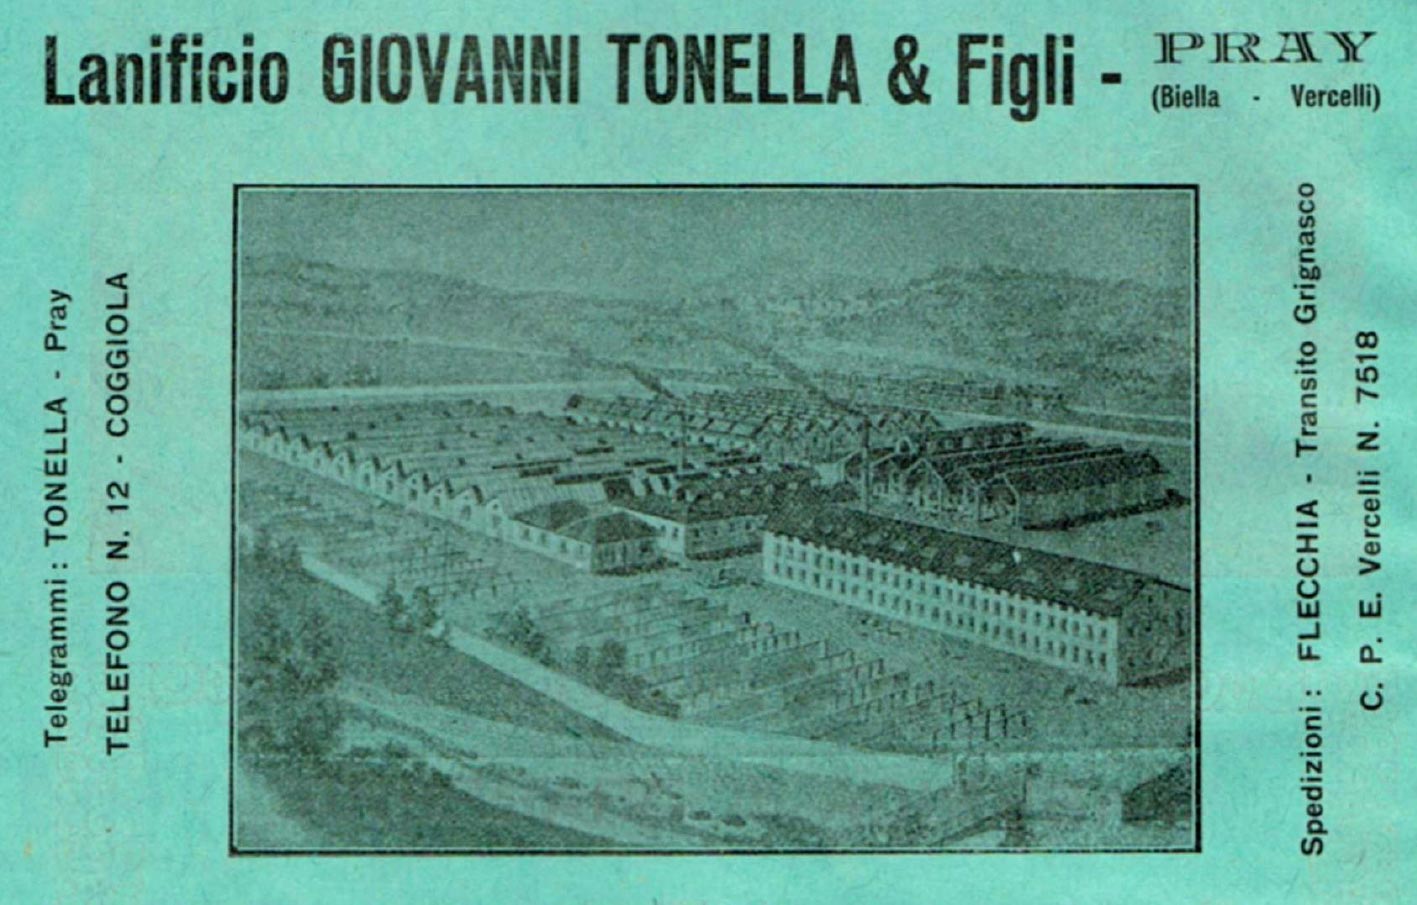 Advertisement for the Giovanni Maria Tonella & Figli firm from the 1920s. Shed-style buildings had already been added to the original Manchester-style establishment (on the right). Note, in the foreground at the bottom, the racks for drying the fabric.